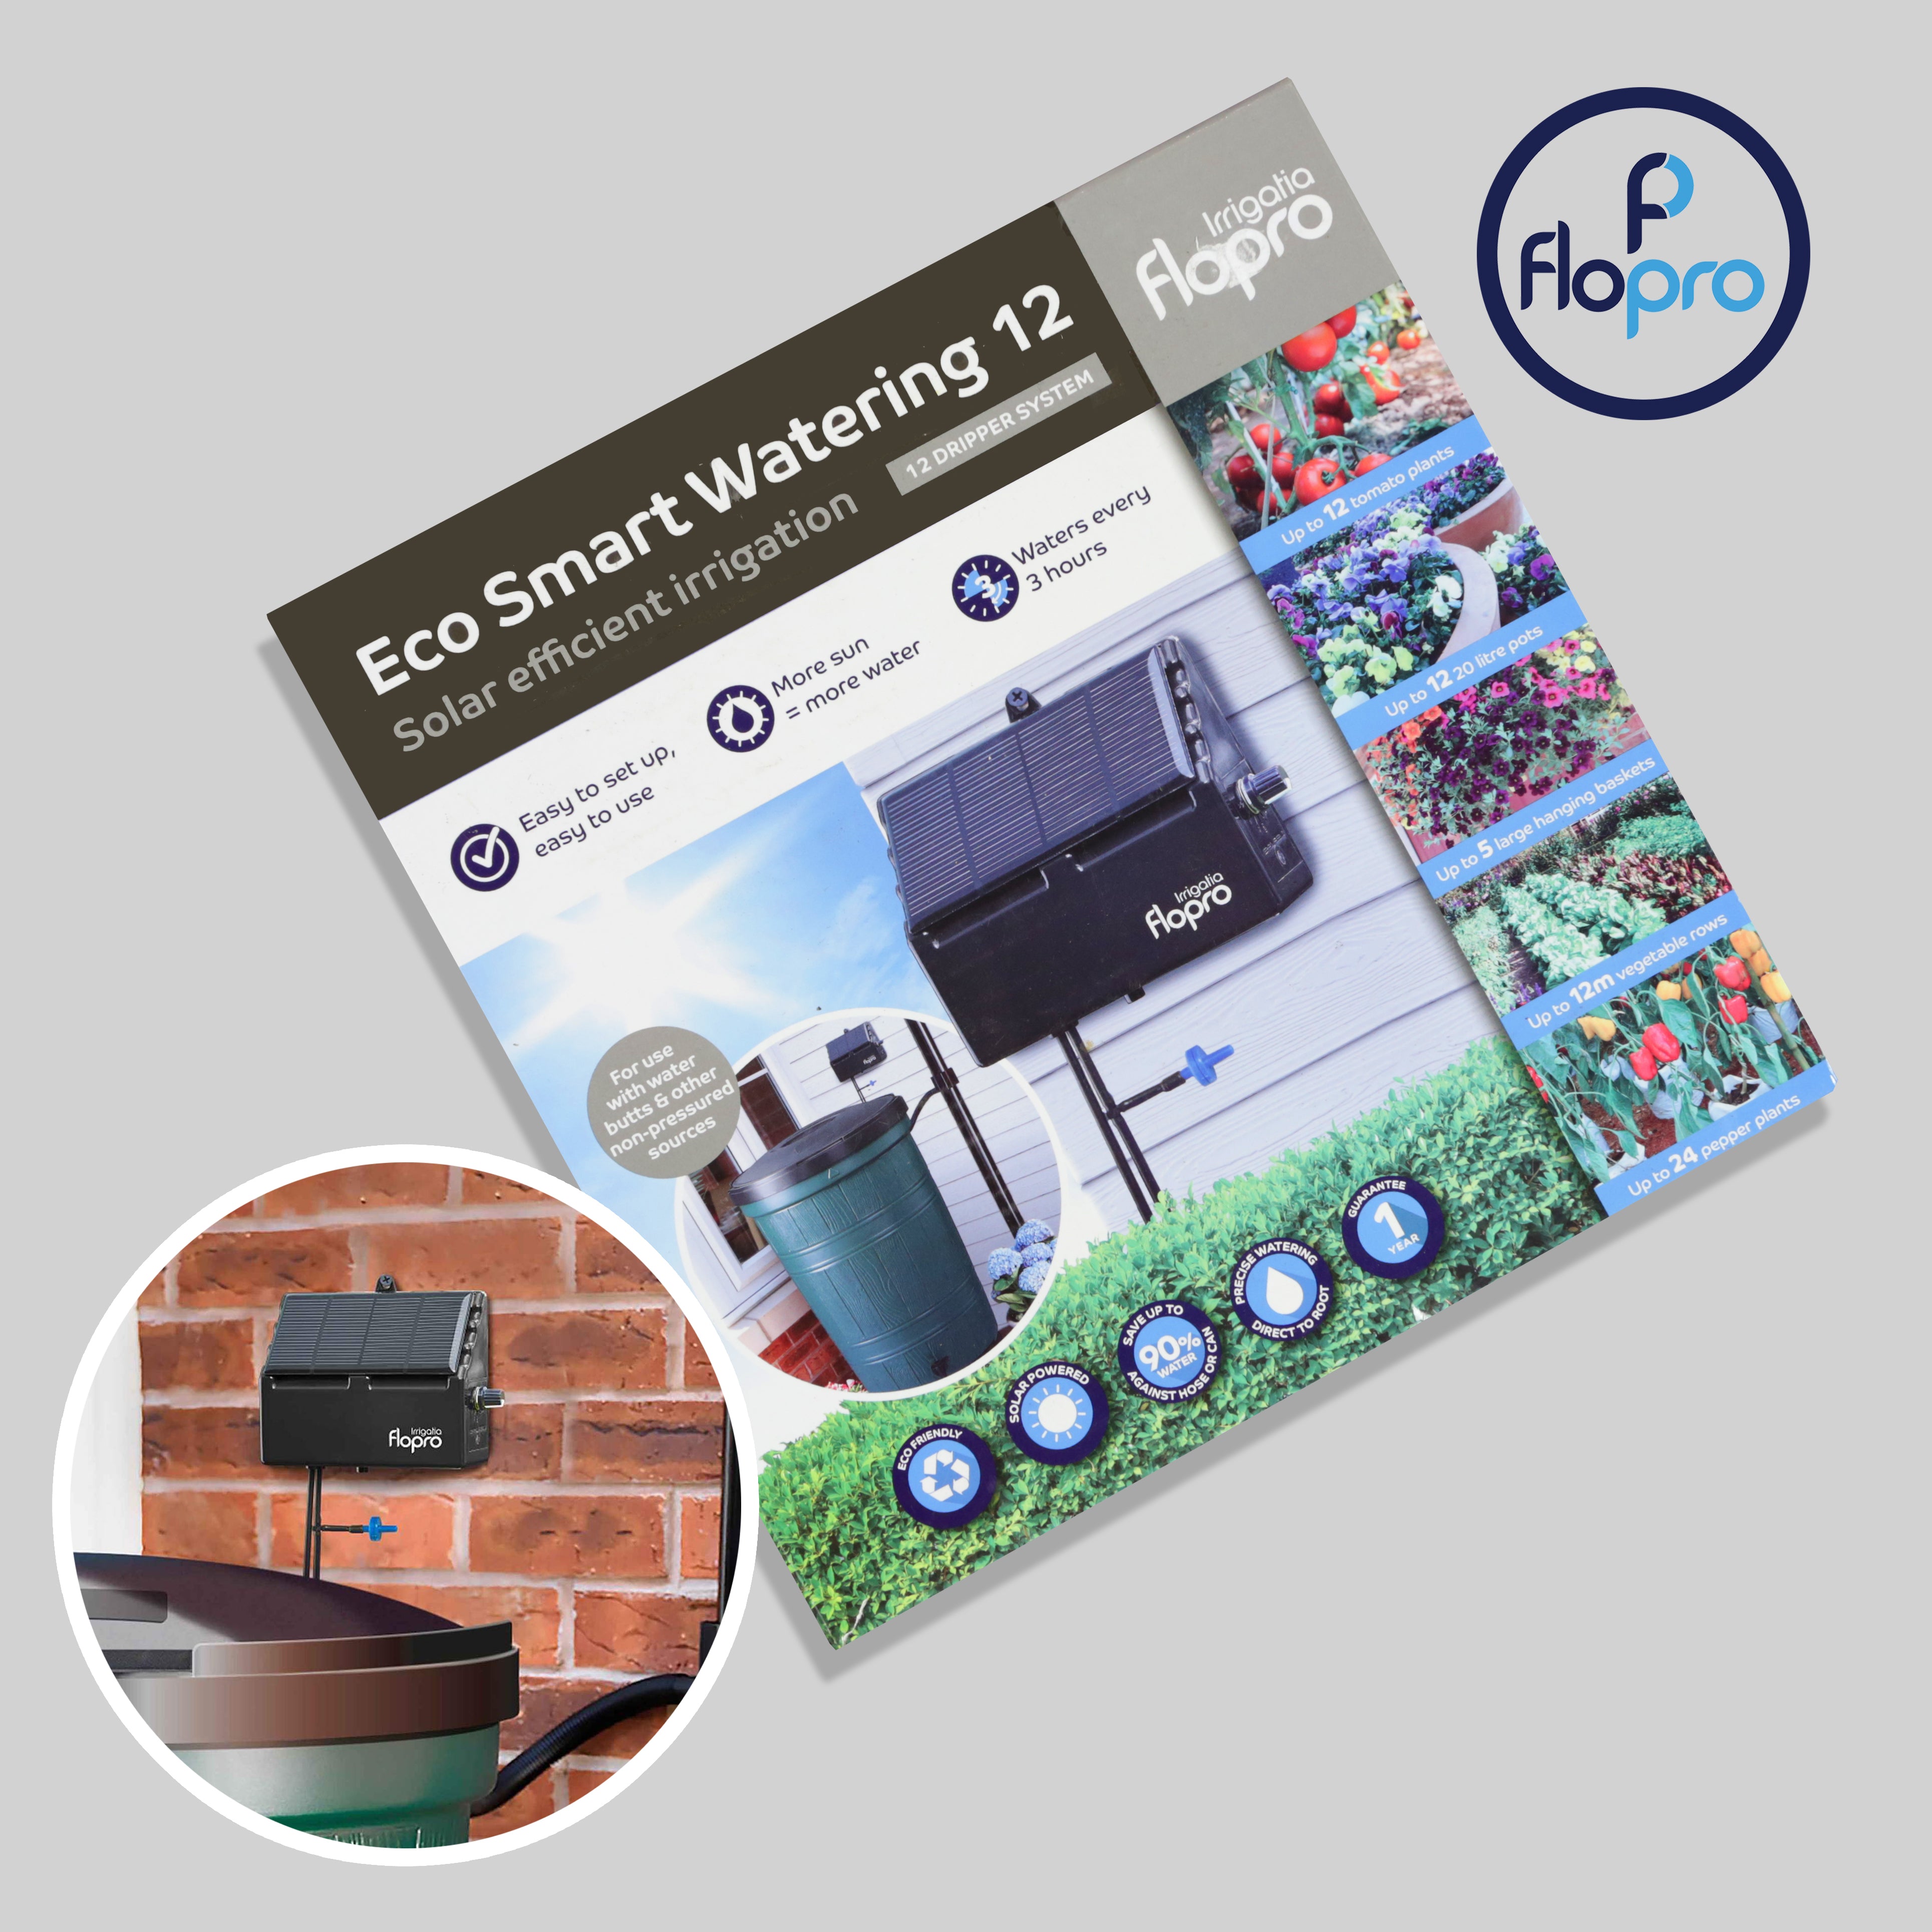 Irrigatia Eco Smart Watering 12 by Flopro, sold by In-Excess